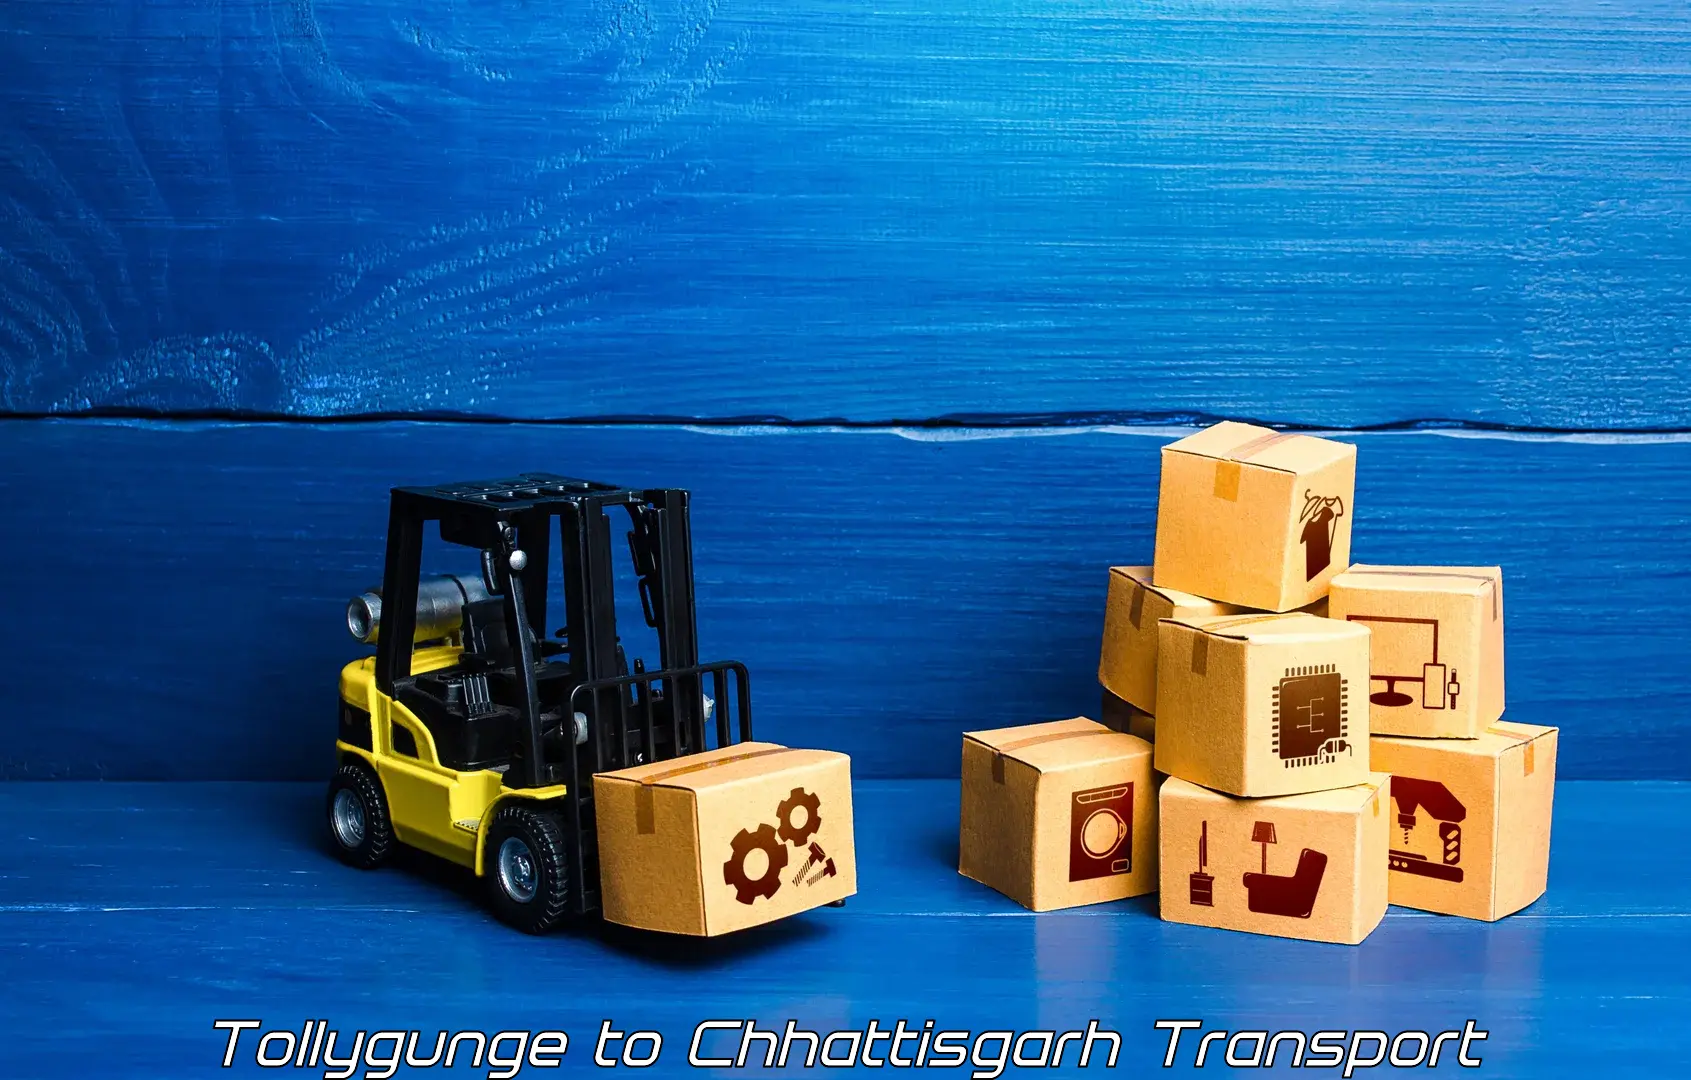 Container transport service Tollygunge to Mandhar